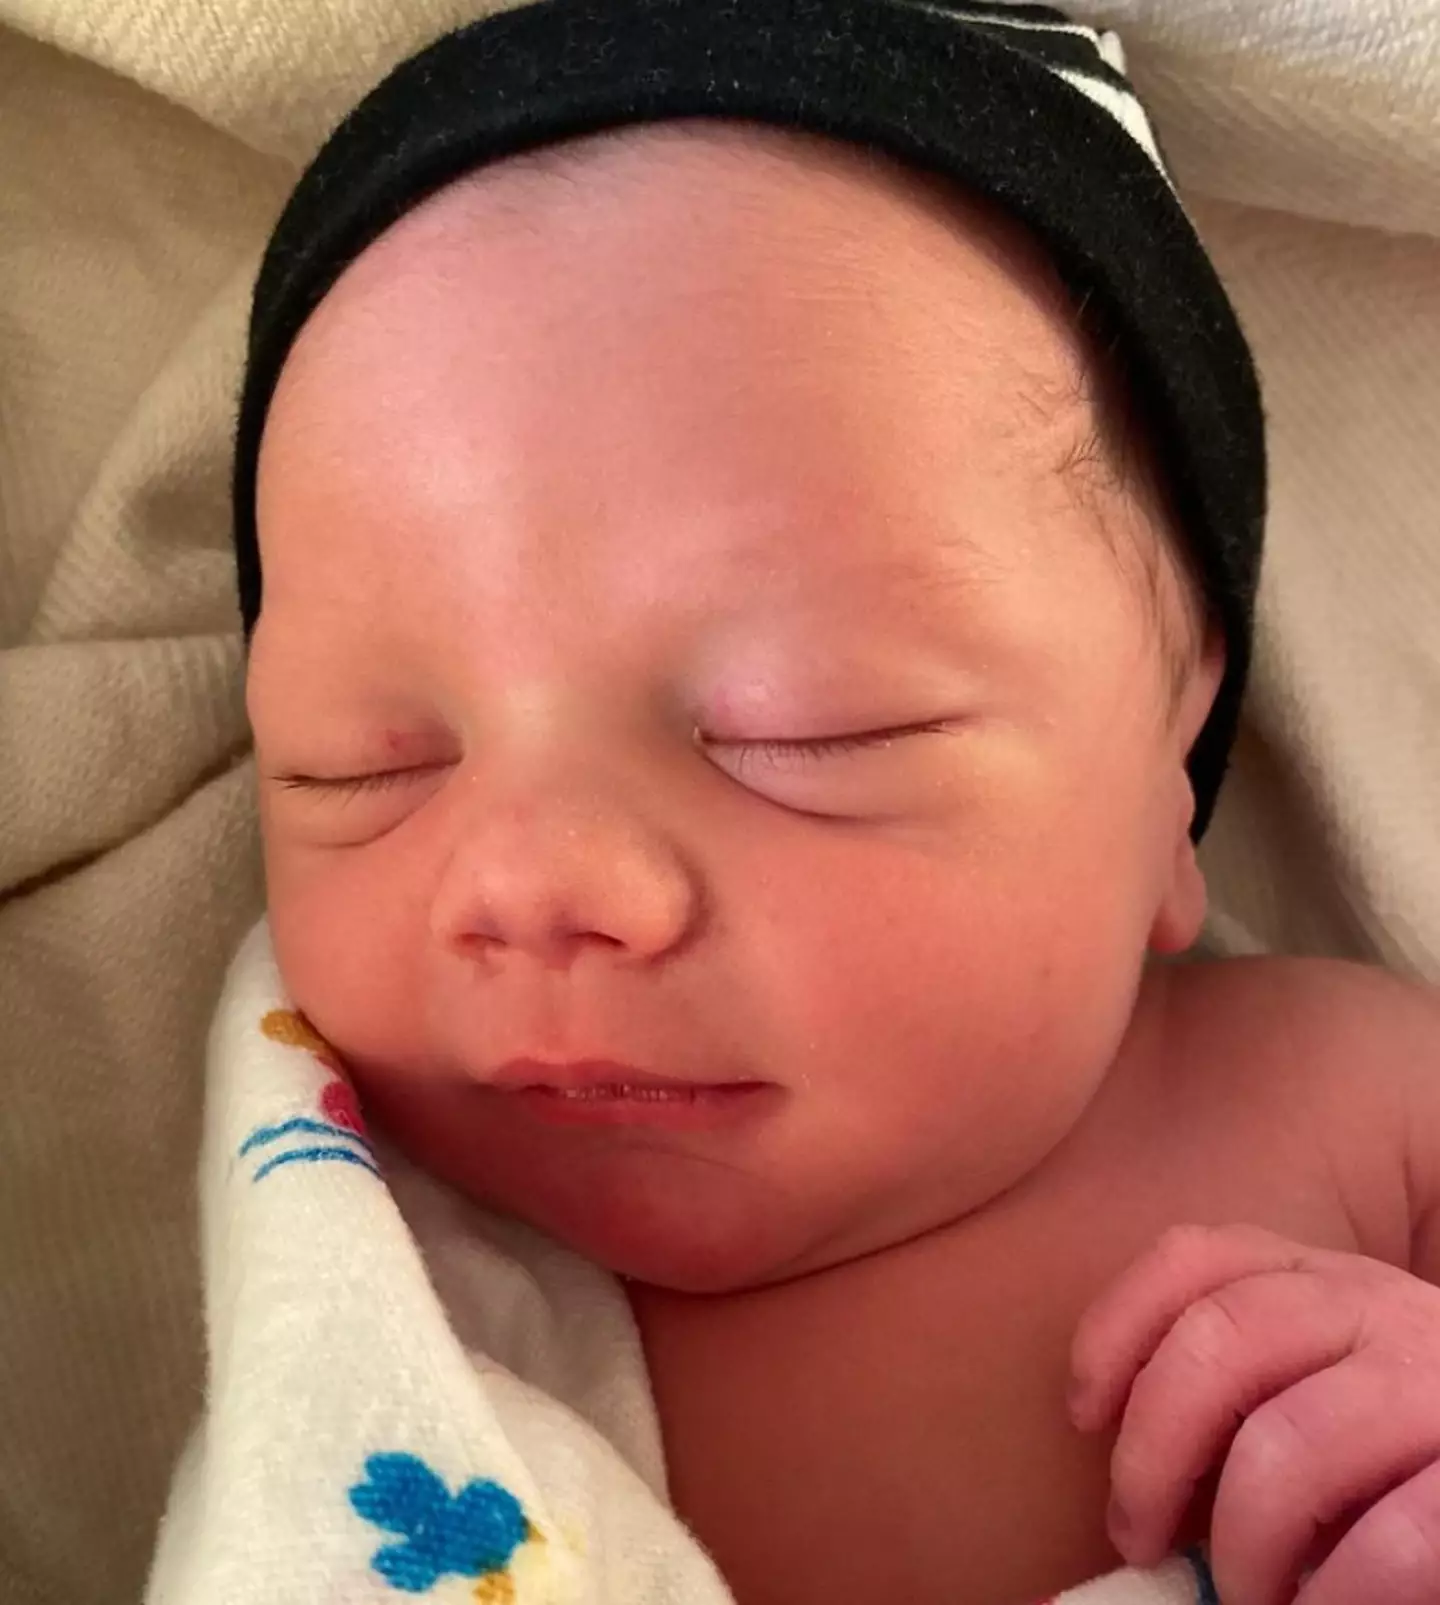 The James Bond icon announced on Instagram that his fourth grandchild had been welcomed into the world.